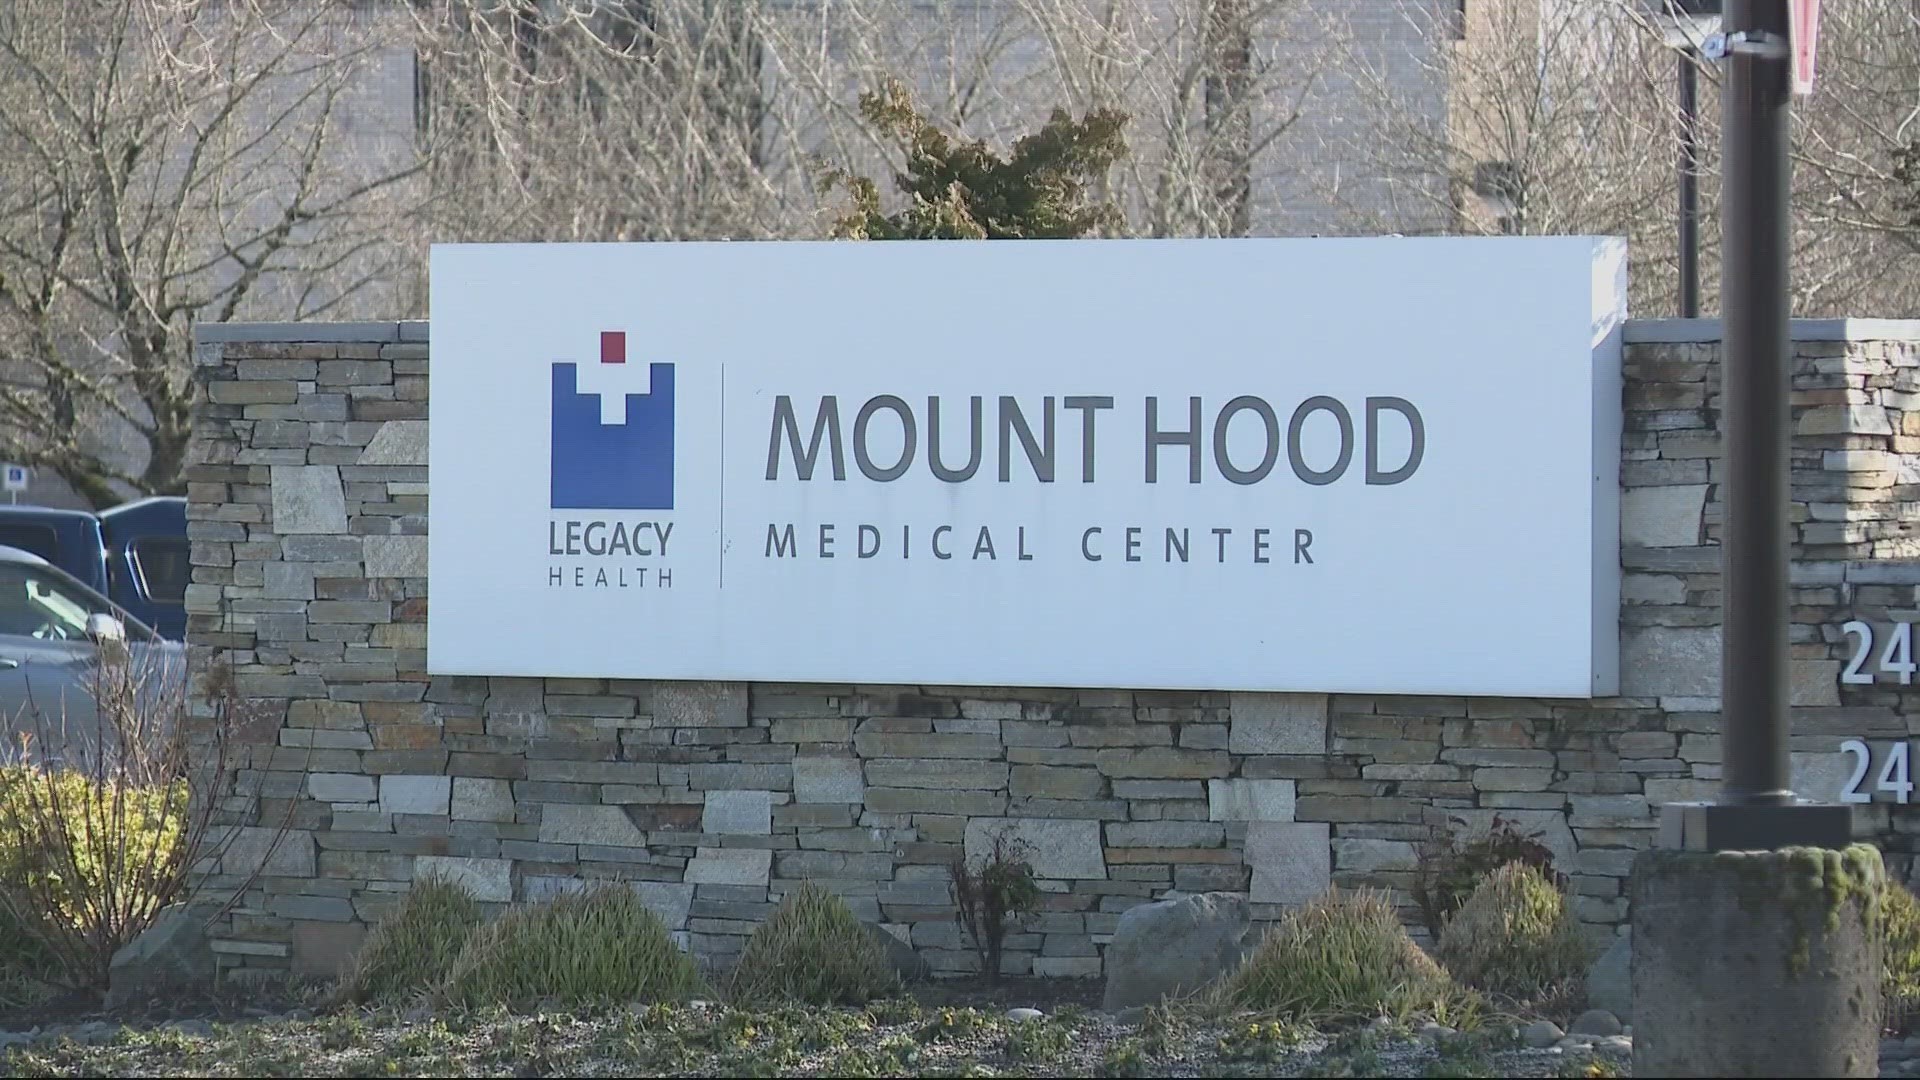 Legacy Health has announced that the Mount Hood Family Birth Center in Gresham will reopen on June 21. It has been closed for nearly three months, since March 17.